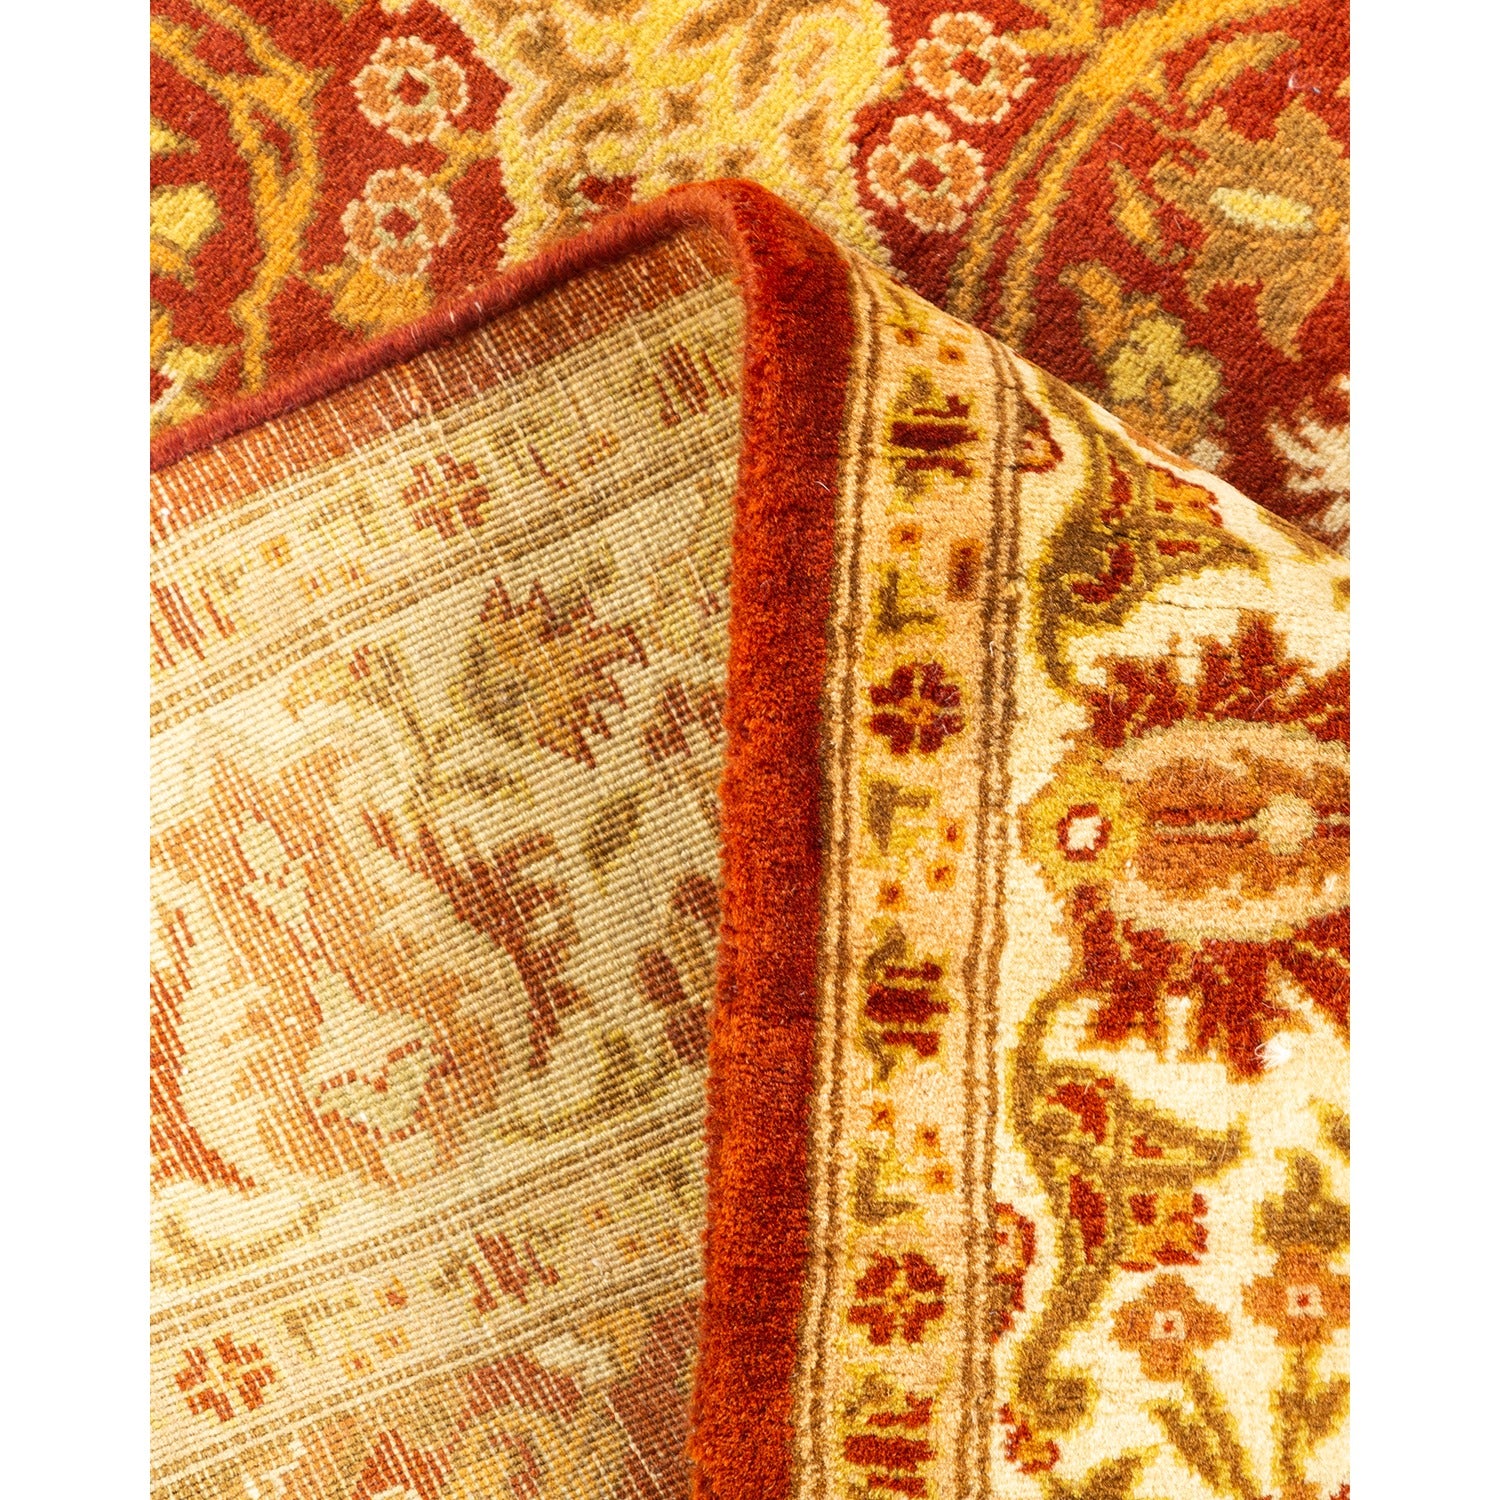 Close-up of folded oriental carpet showcasing intricate patterns and rich colors.